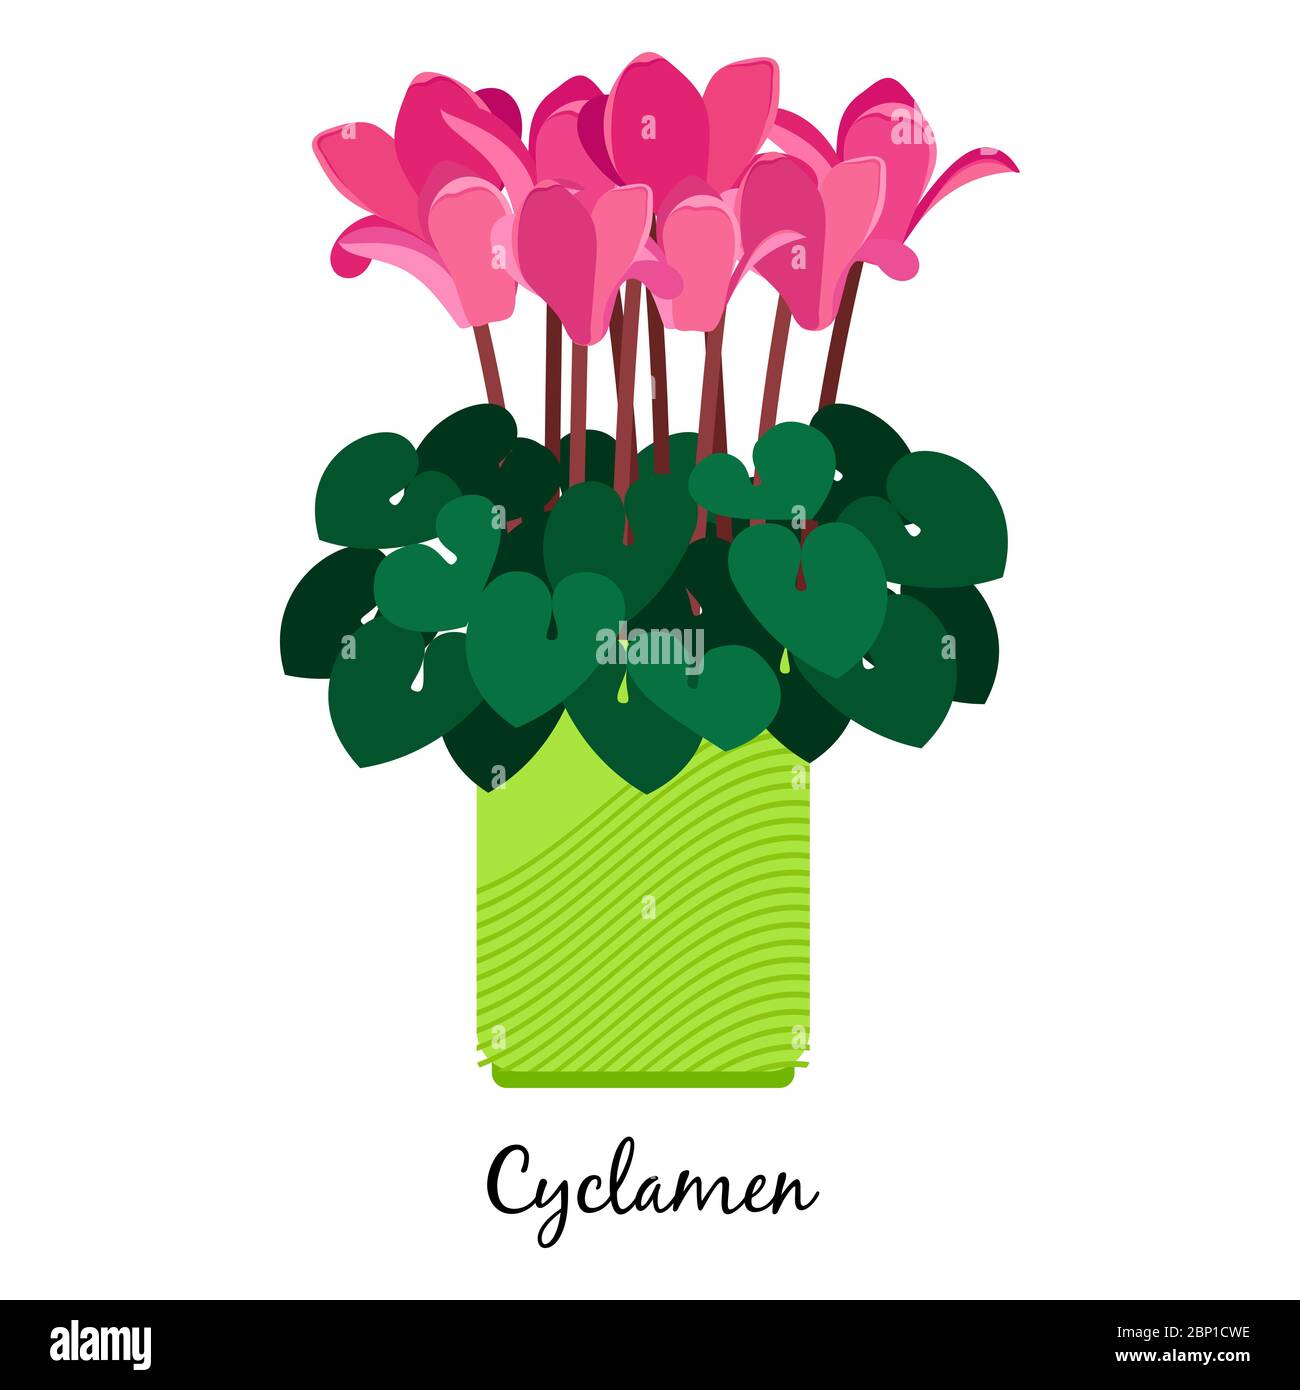 Cyclamen plant in pot isolated on the white background, vector illustration Stock Vector